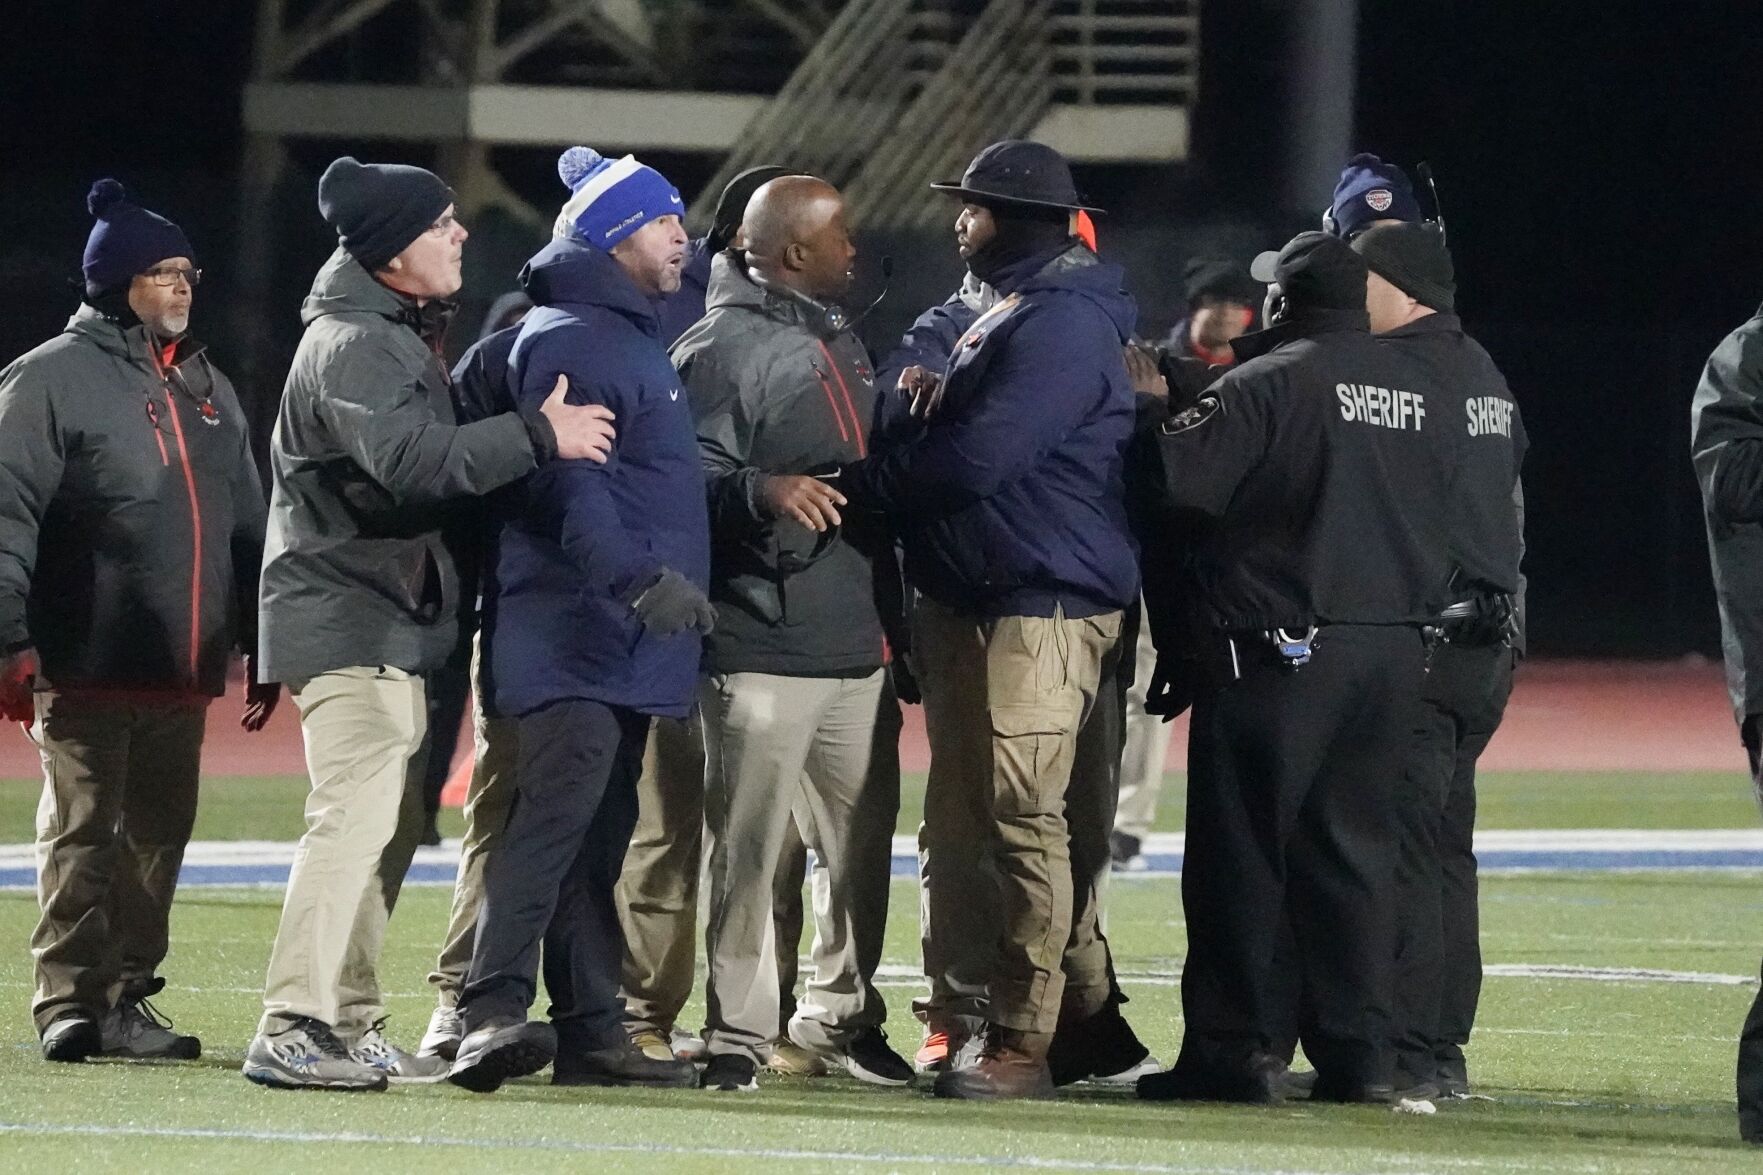 Bennett Football Coach Alleges Assault by Officer During State Semifinal Game